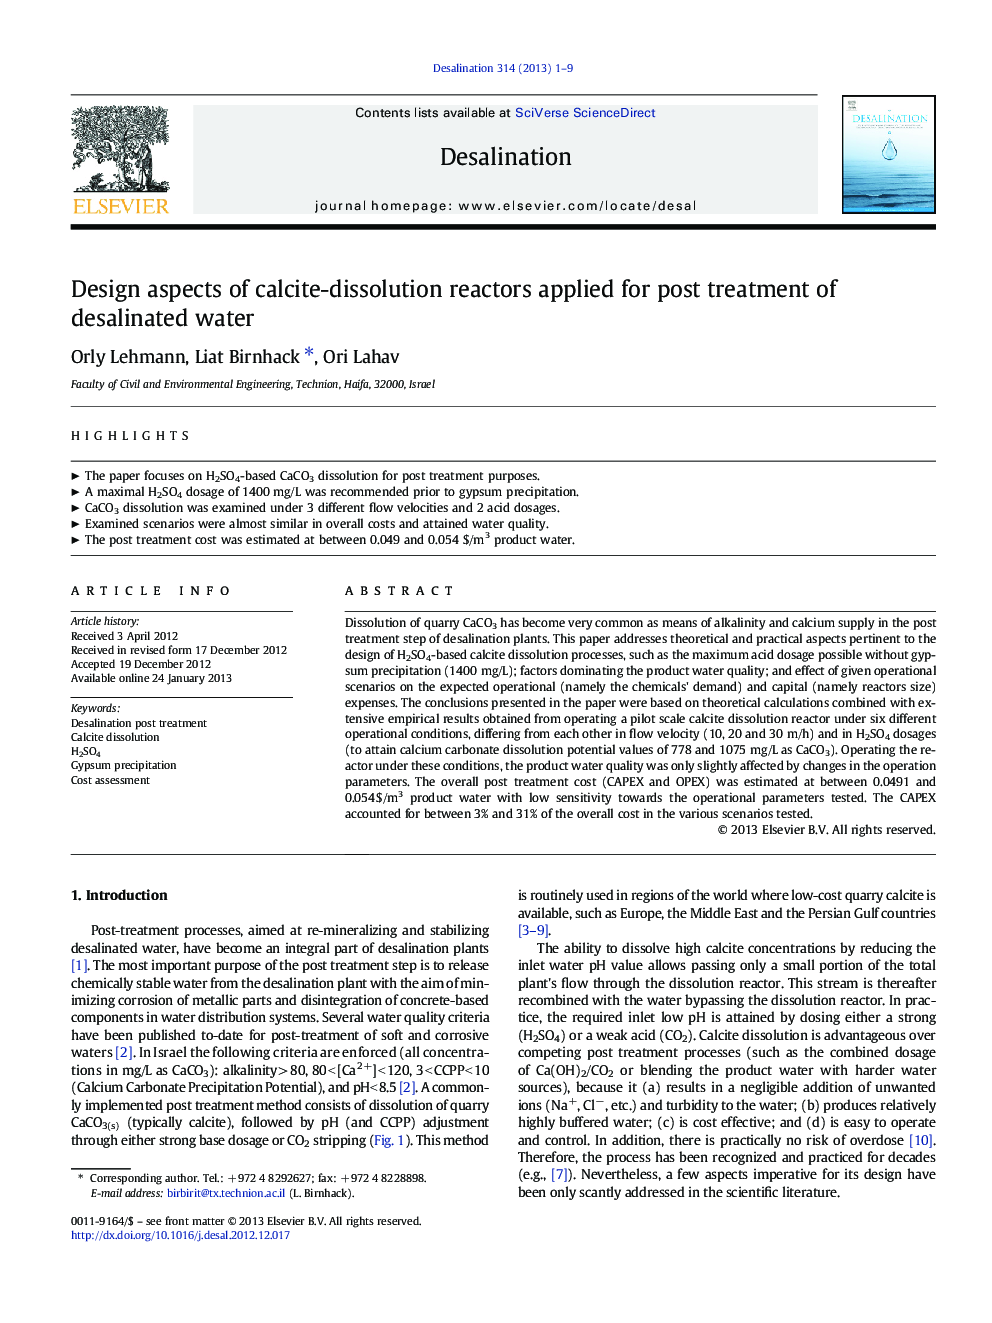 Design aspects of calcite-dissolution reactors applied for post treatment of desalinated water